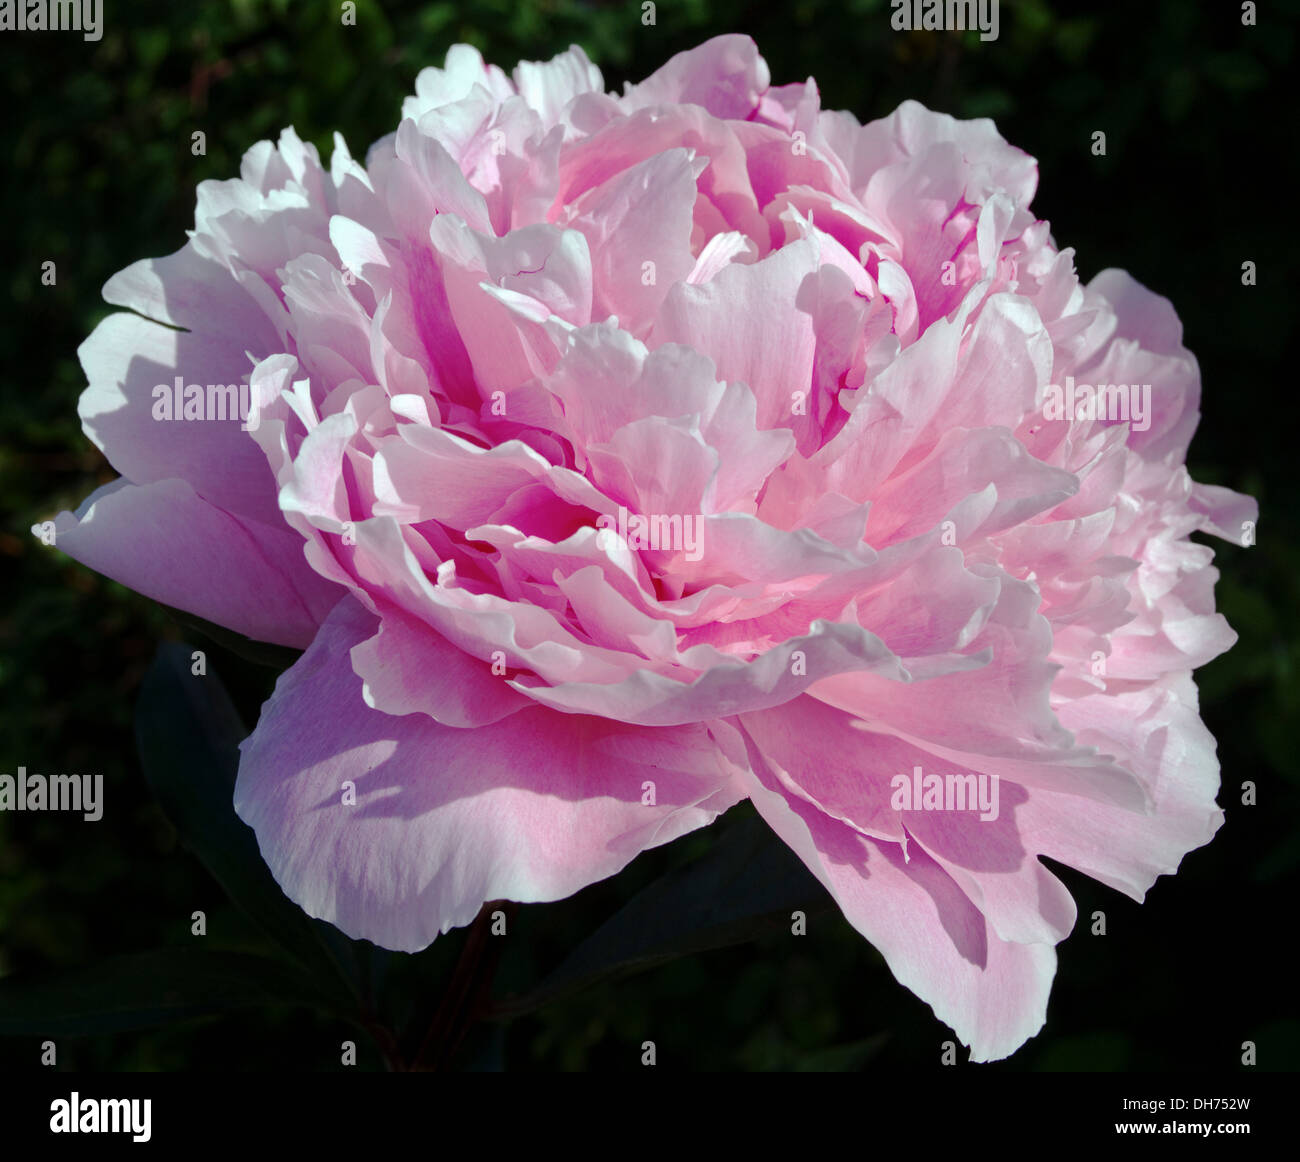 Close up of pink peony in flower against a dark background, early morning sunlight, English garden Stock Photo